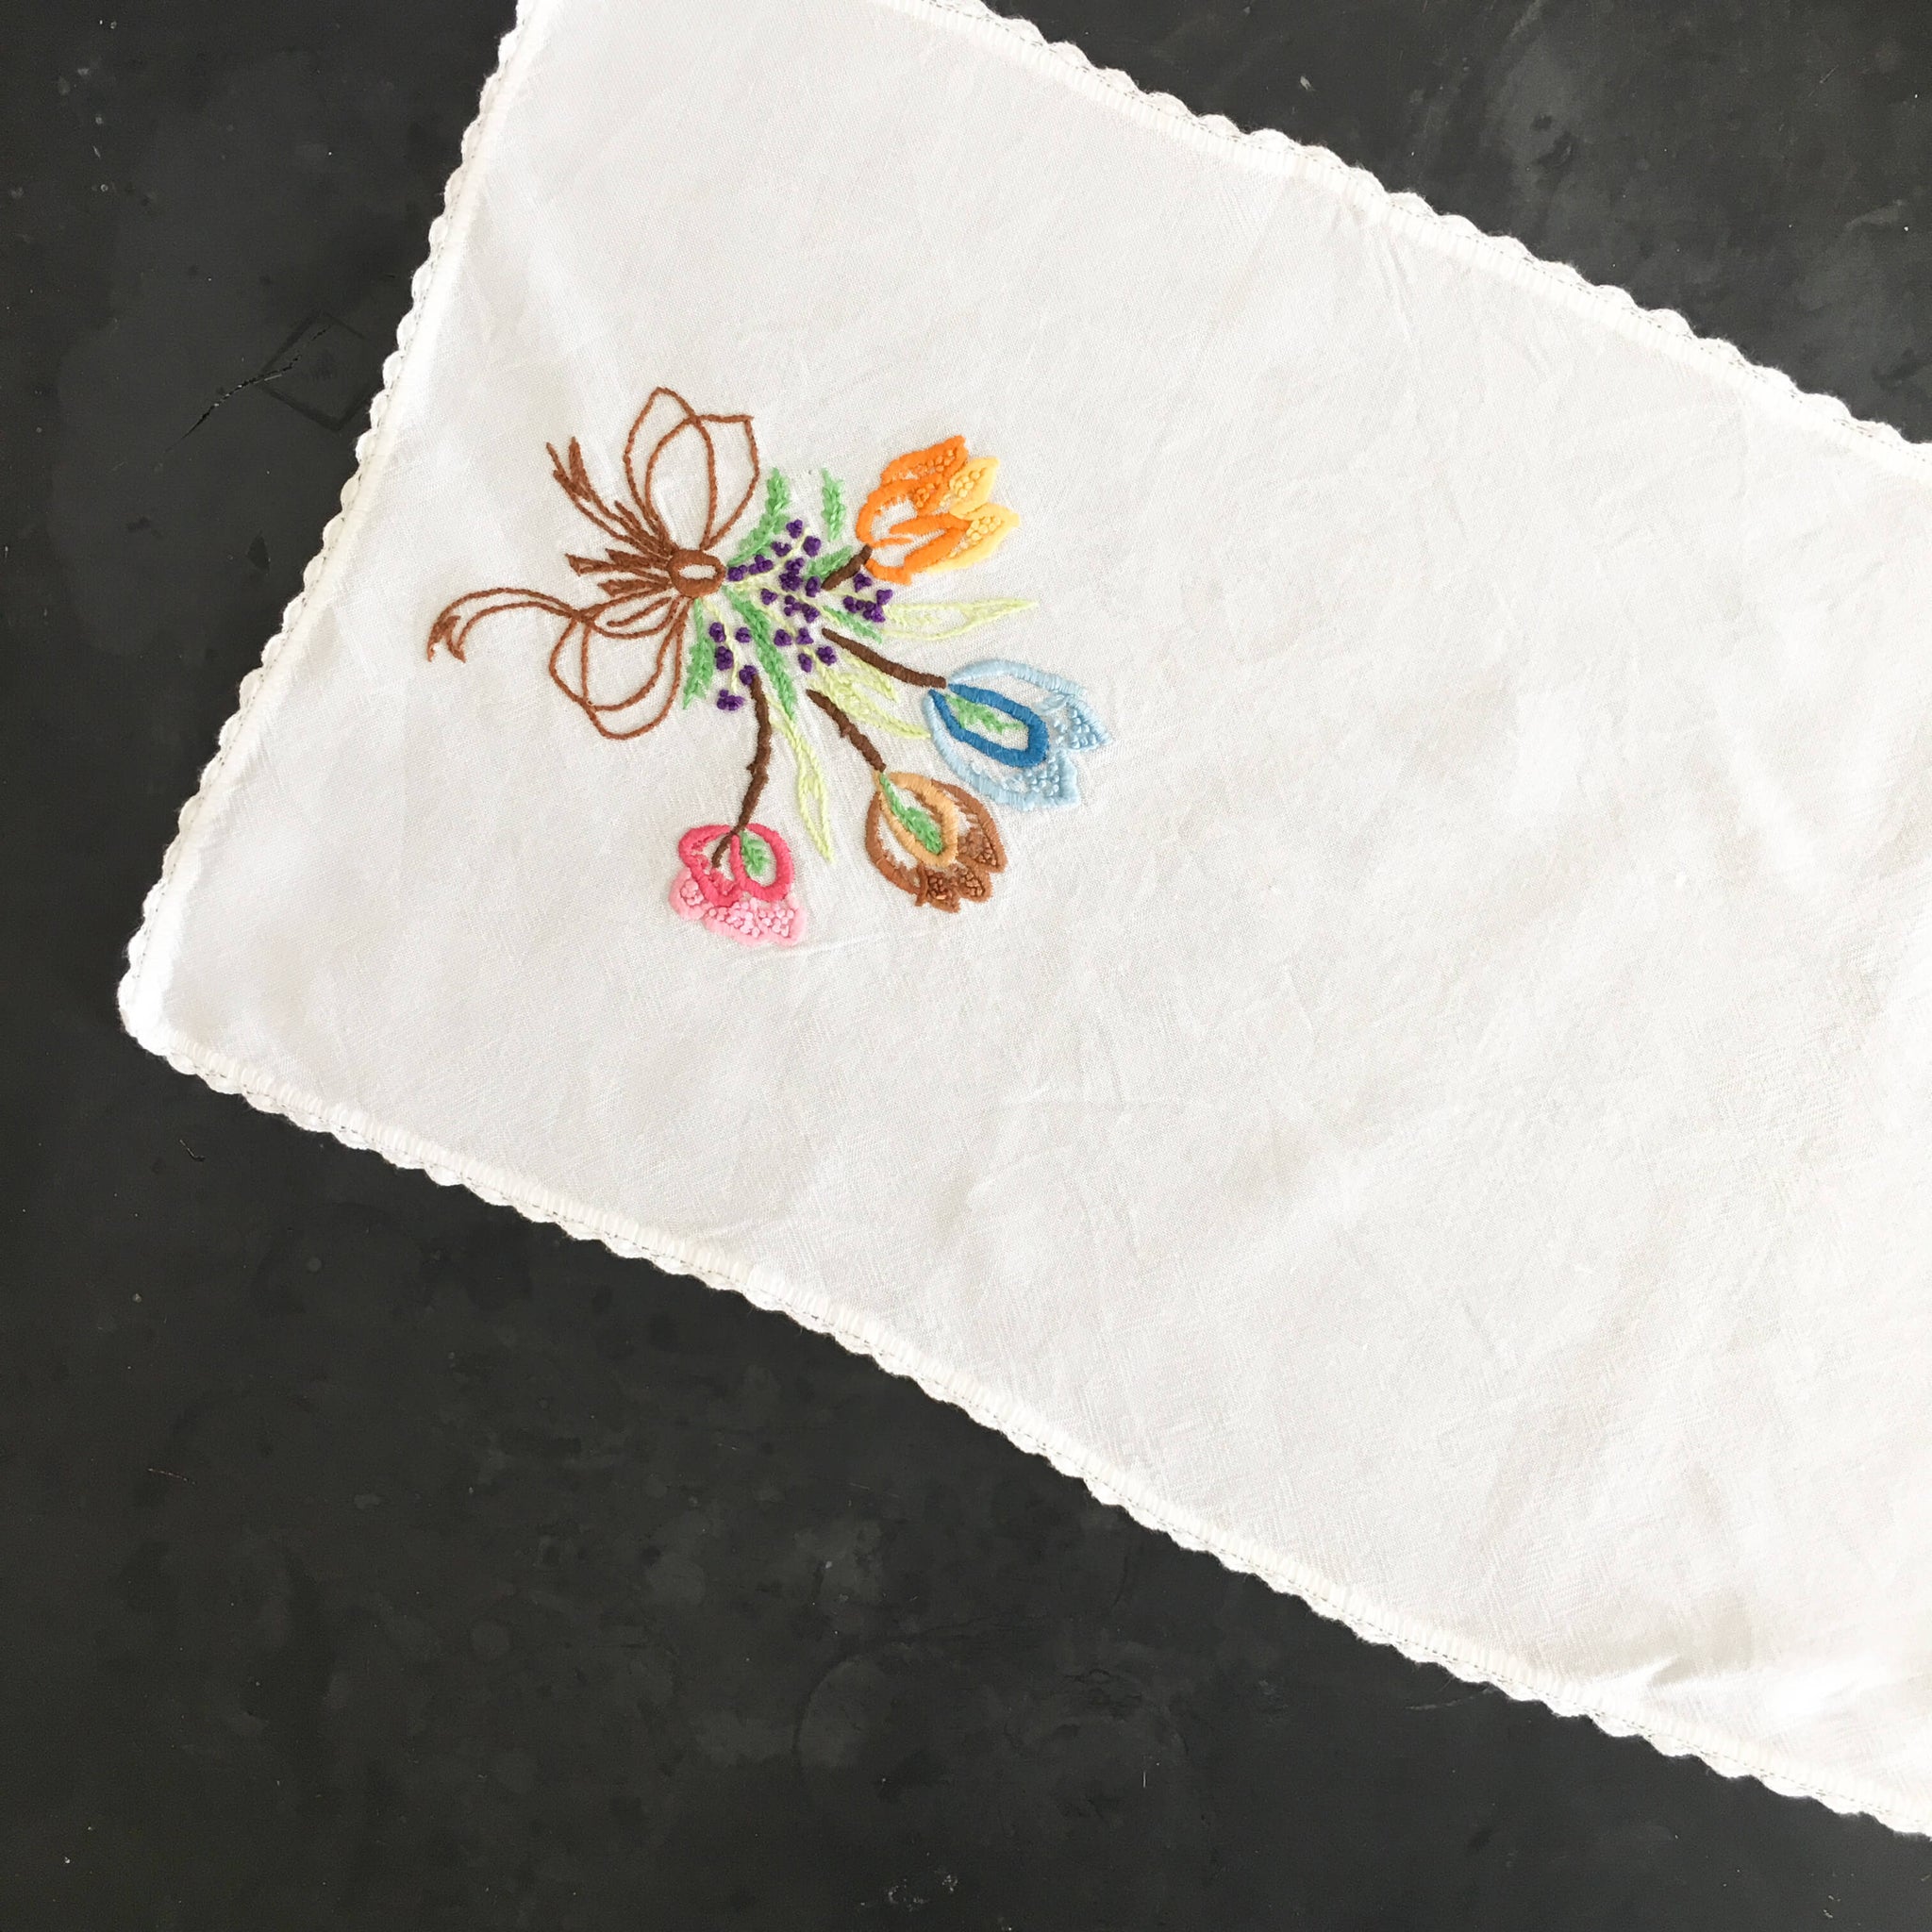 Vintage Embroidered Wool Table Runner - Colorful Tulip Bouquets with Scalloped Crocheted Edge